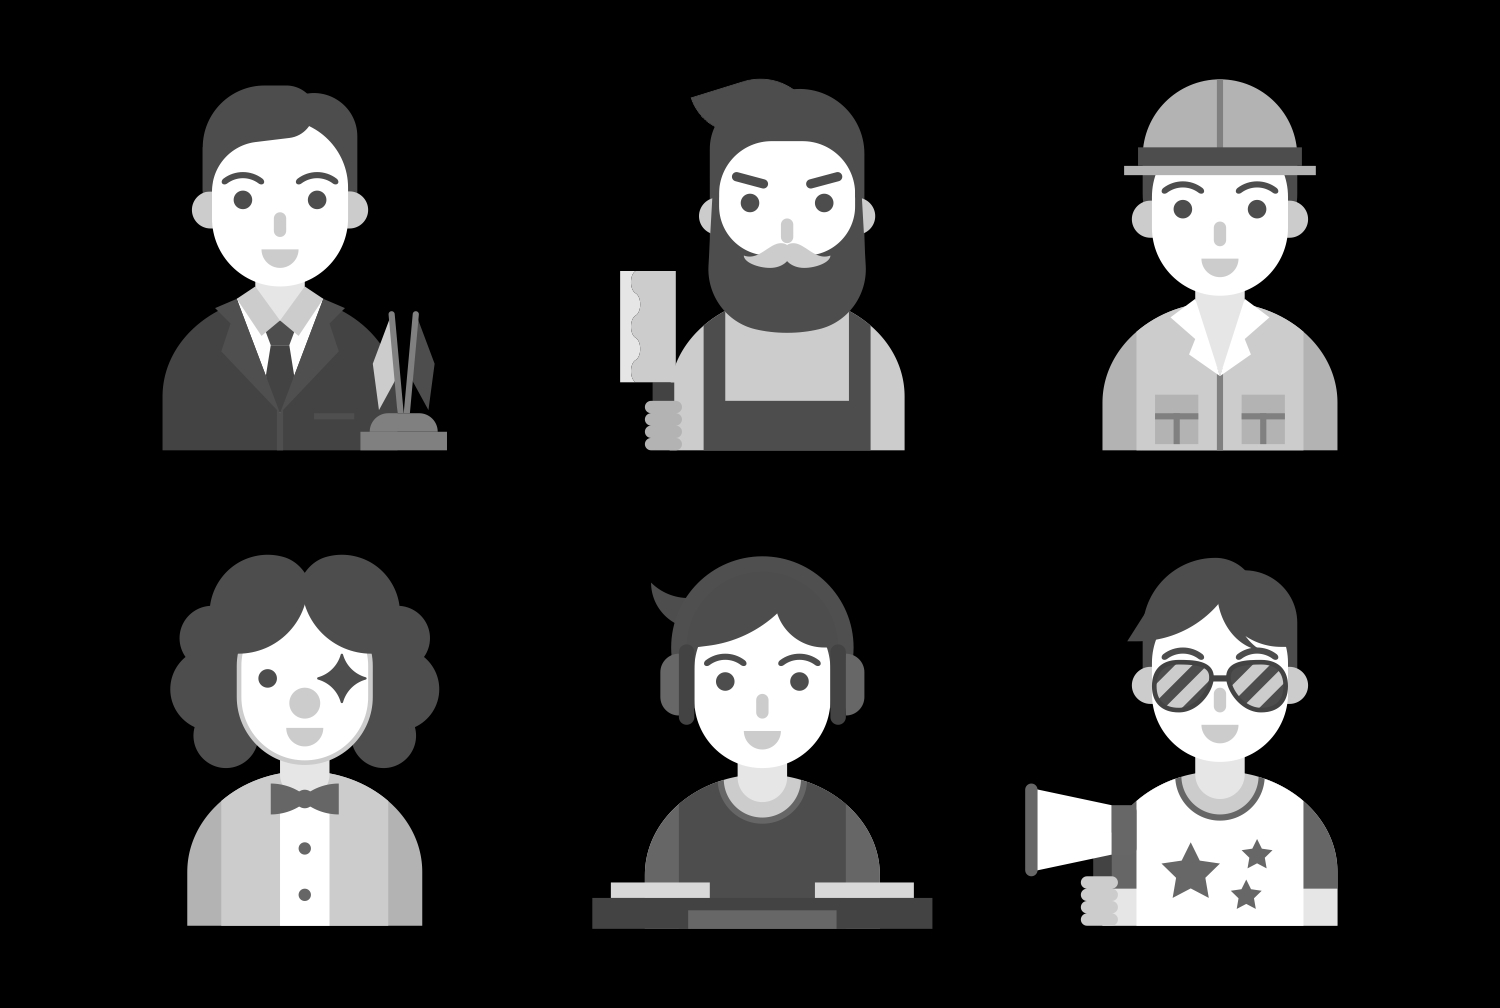 free vector Profession and job related icon set design CDR file download for free